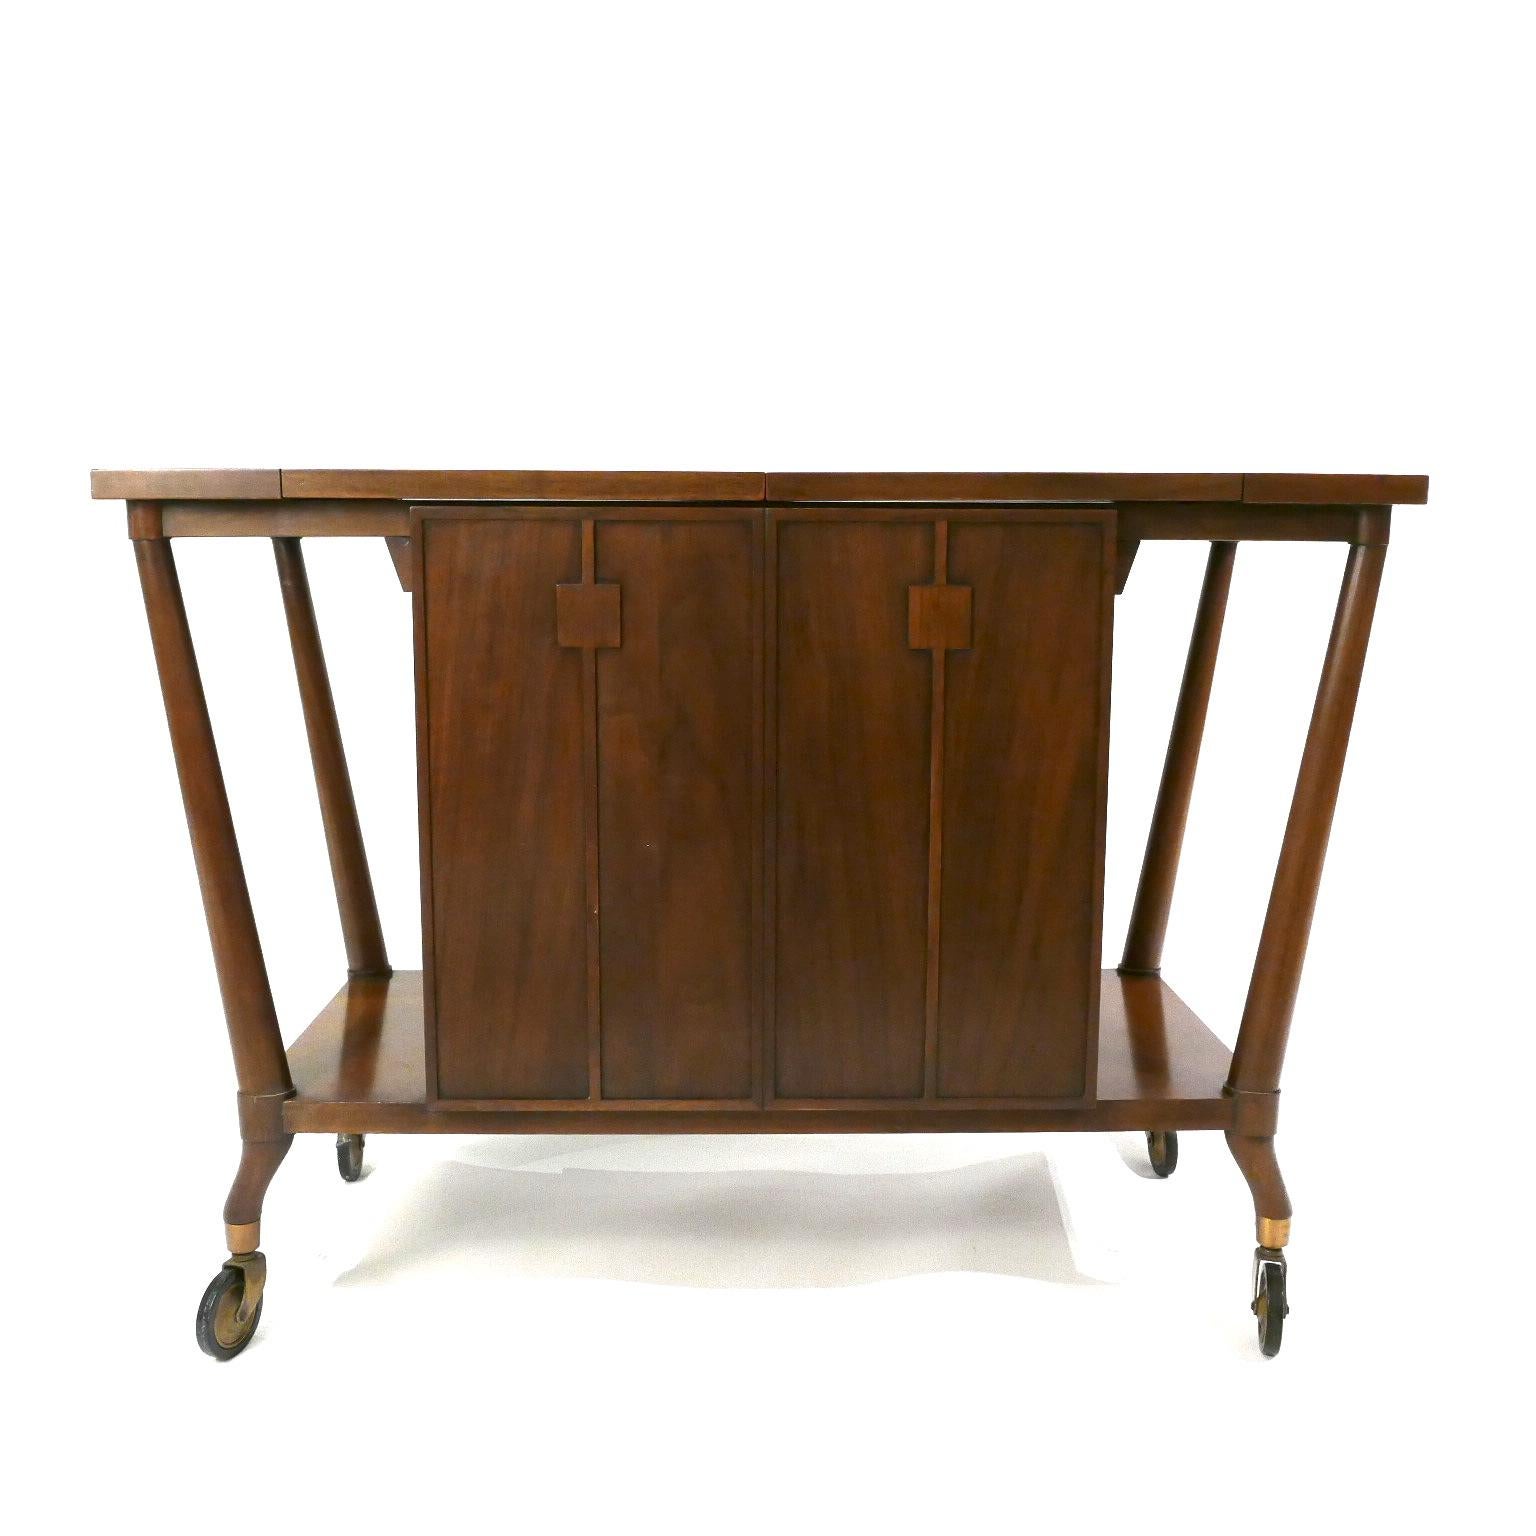 Amazing two-sided bar cart designed for The Forwards Trend Line of Johnson furniture company / Johnson Handley. Sturdy free rolling brass wheels. One side stores drink ingredients with a generous drawer for bar tools. This cabinet also has a lock